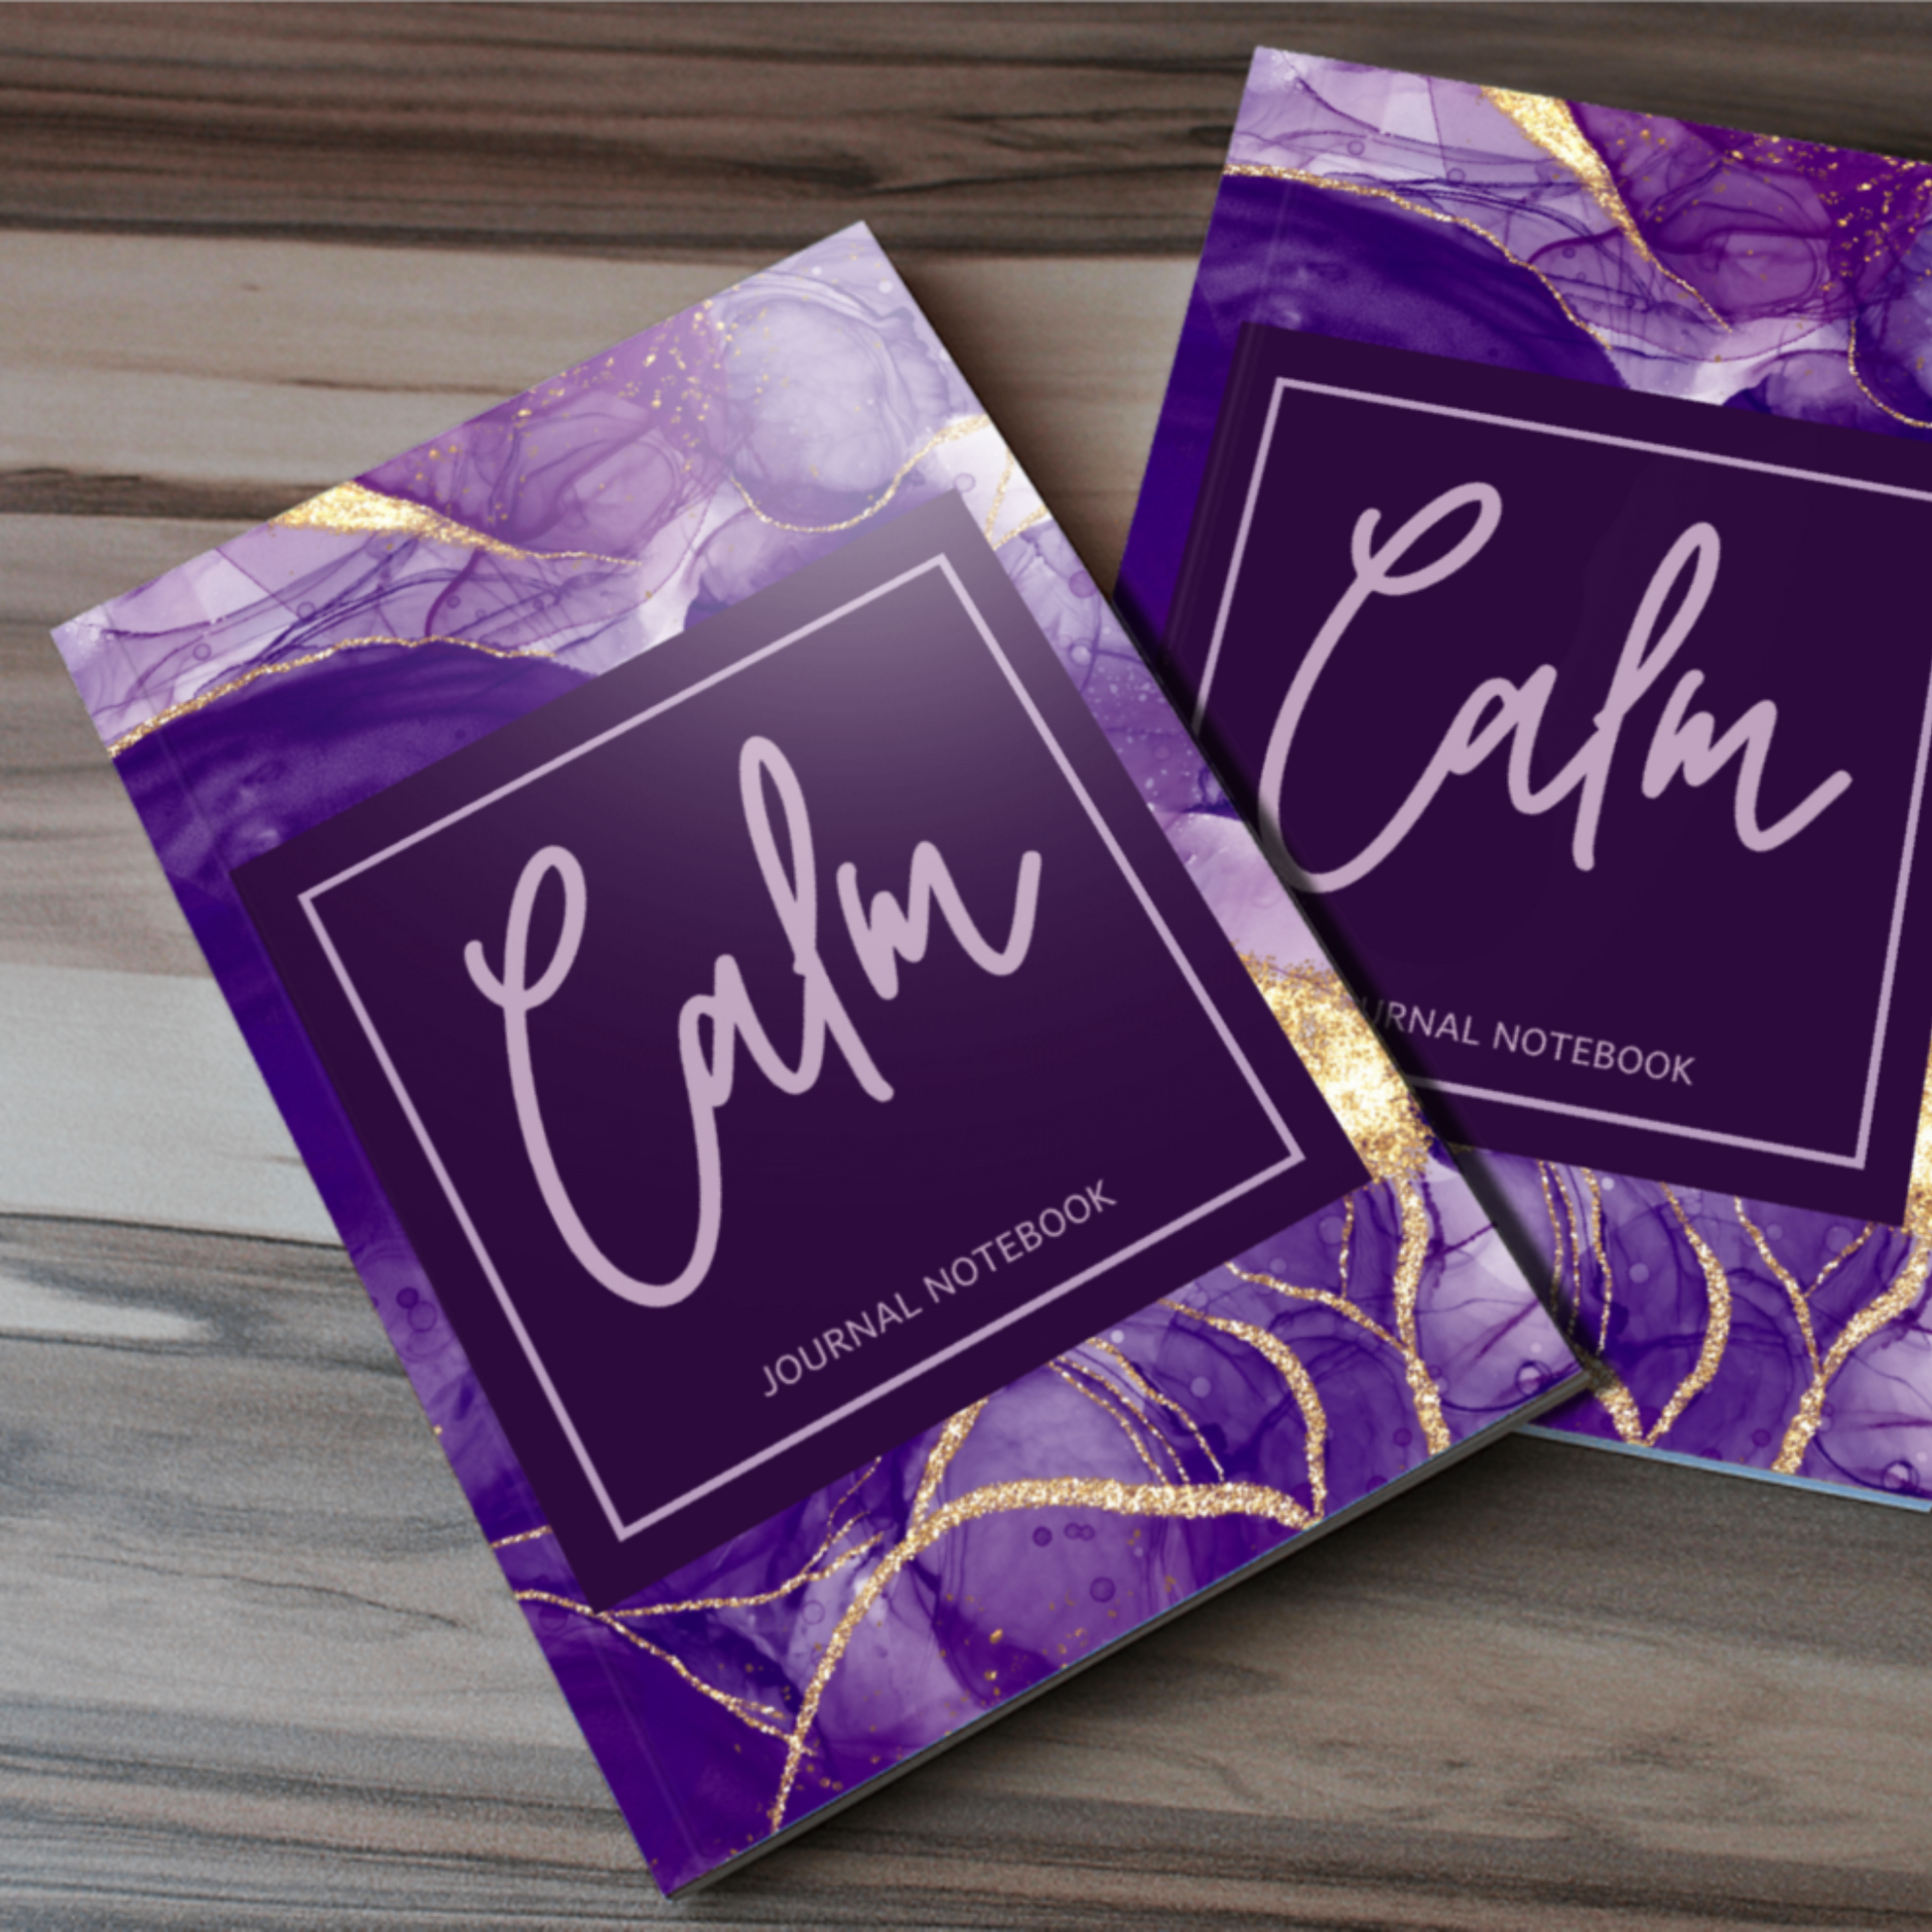 Calm Journal Notebook for KDP/Amazon